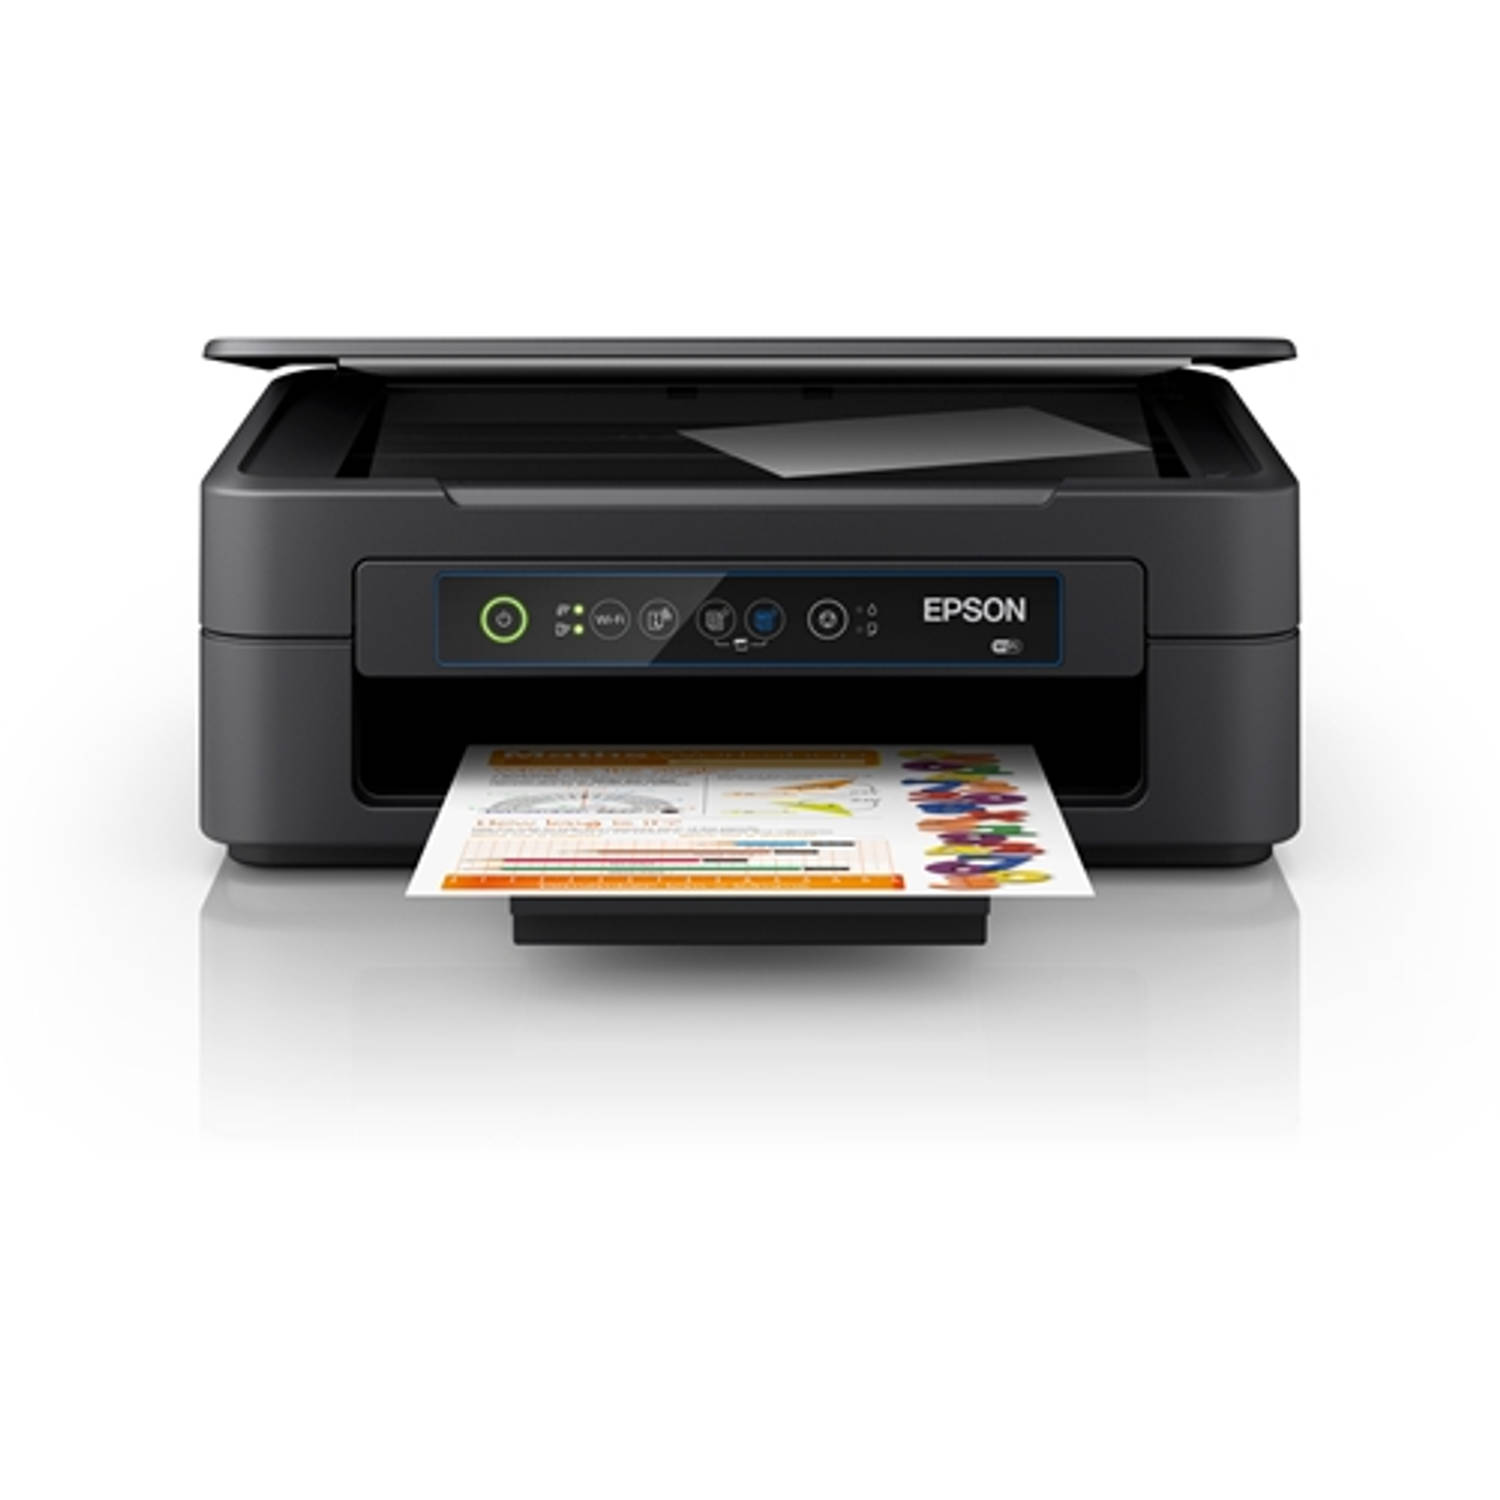 min vertraging Interactie Epson all-in-one printer Expression Home XP-2150 | Blokker